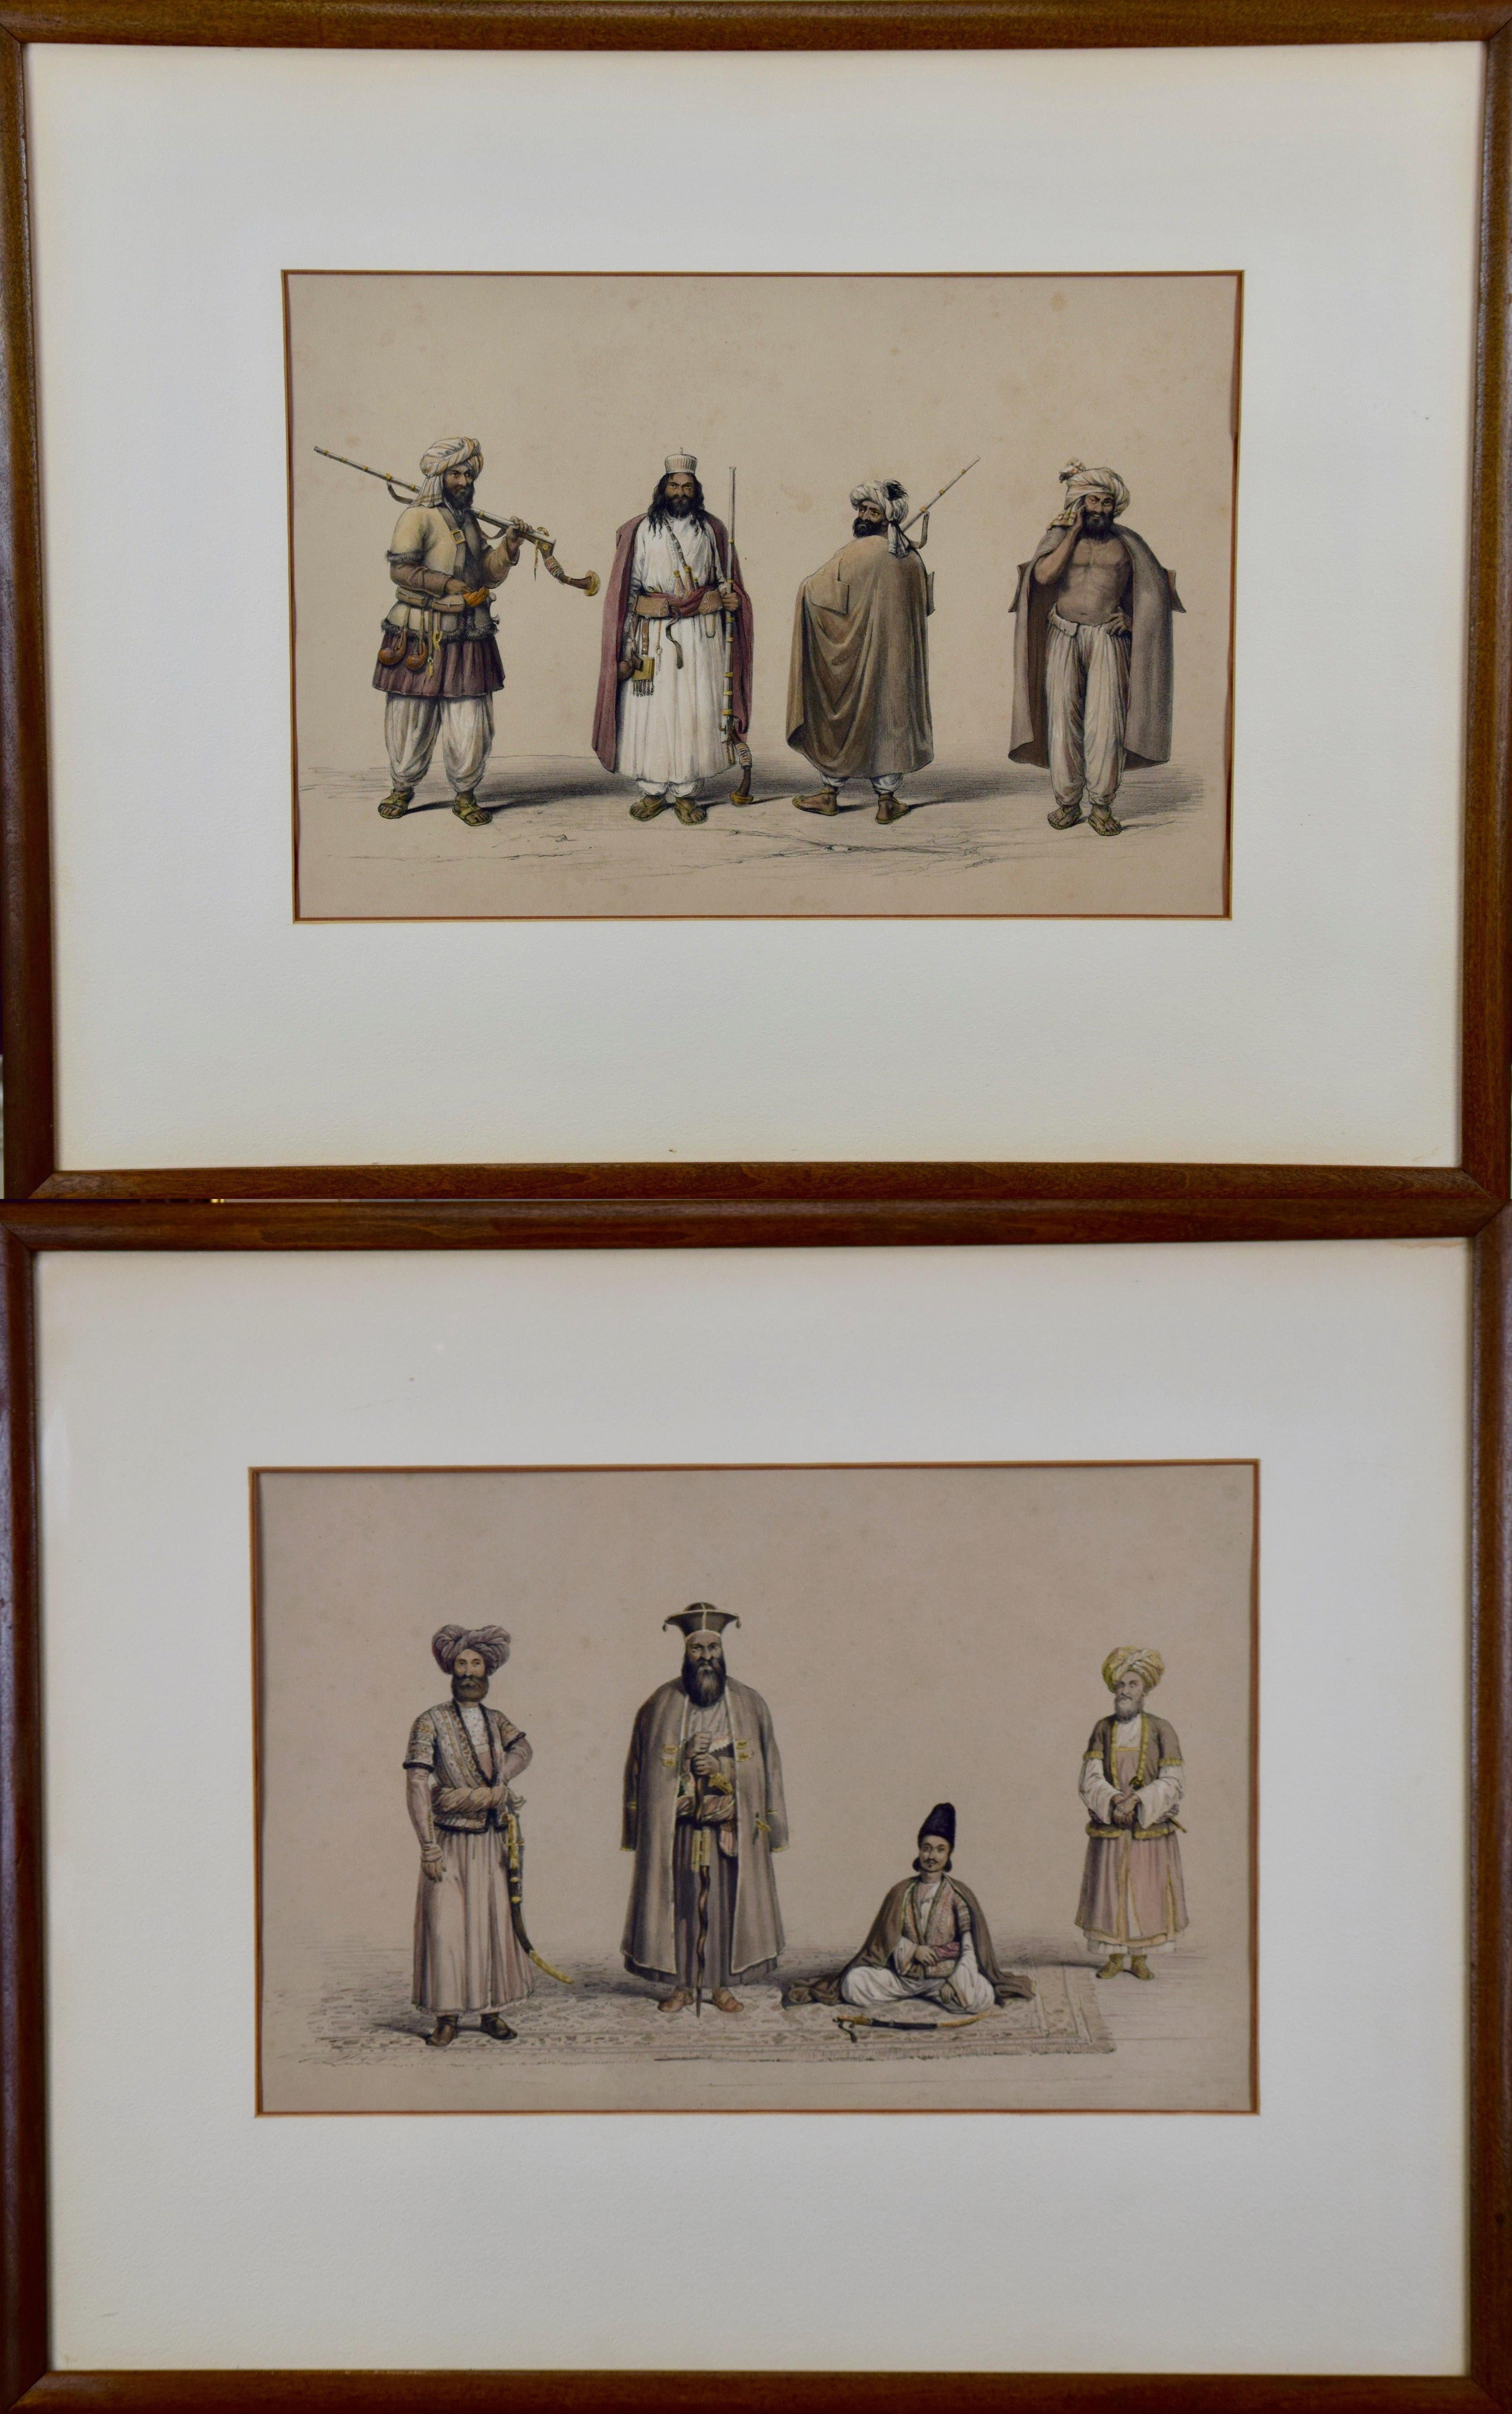 Dr. James Atkinson Portrait Print - A Pair of 19th C. Engravings Depicting the Costumes and Weapons of Afghani Men